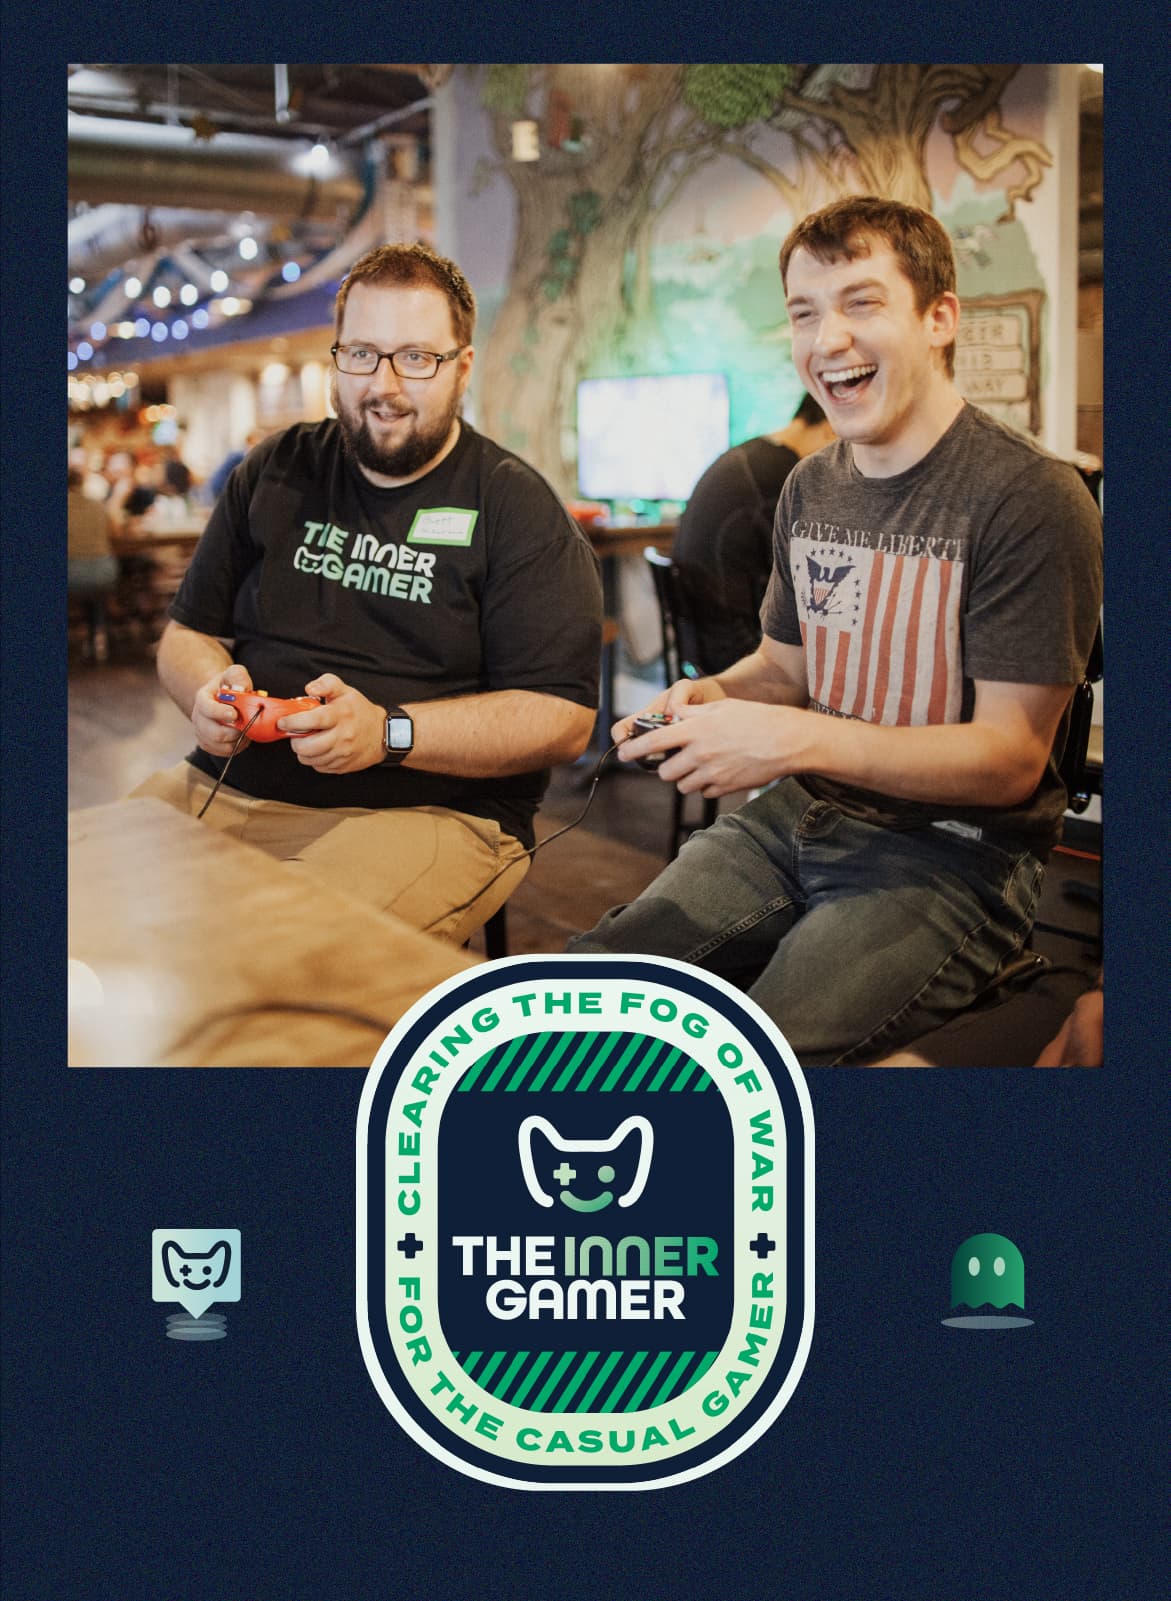 lifestyle image of two gamers playing a video game and one wearing an inner gamer shirt